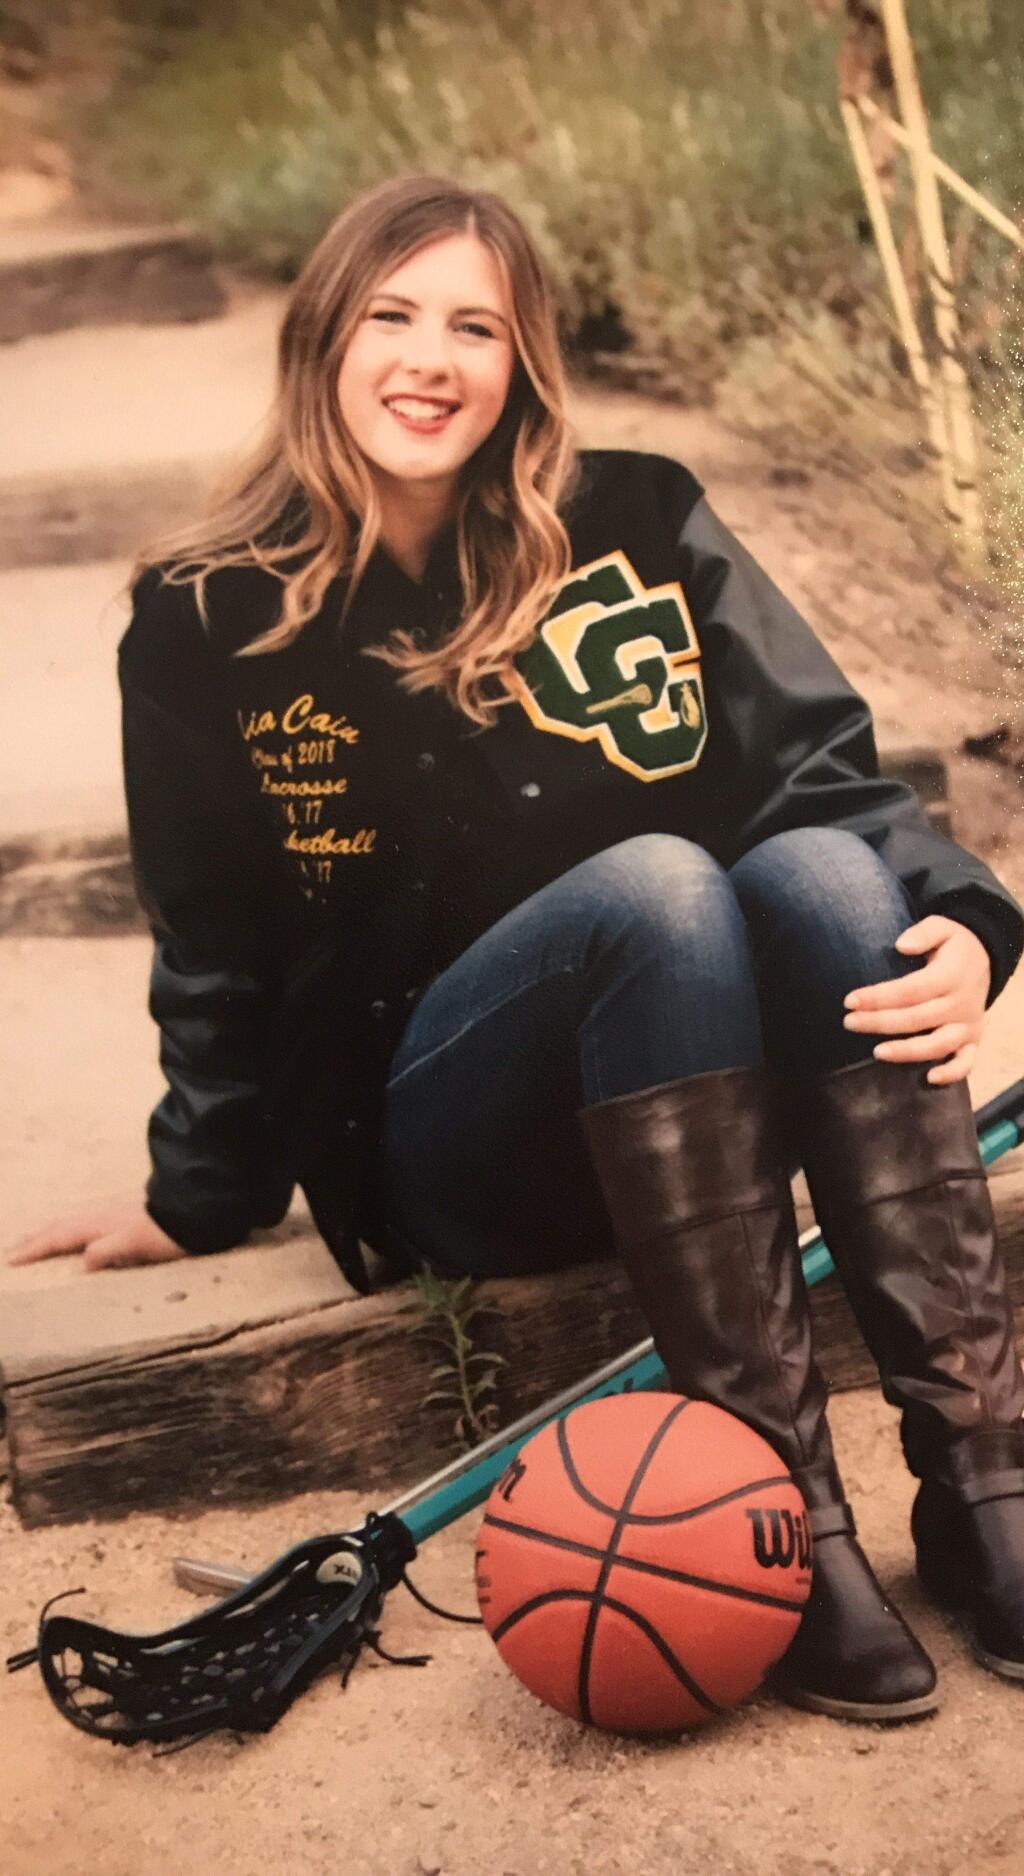 SUBMITTED PHOTOAfter being a three-sport standout for four years at Casa Grande High School, Mia Cain is headed to Chico State University to concentrate on studying to become a nurse.